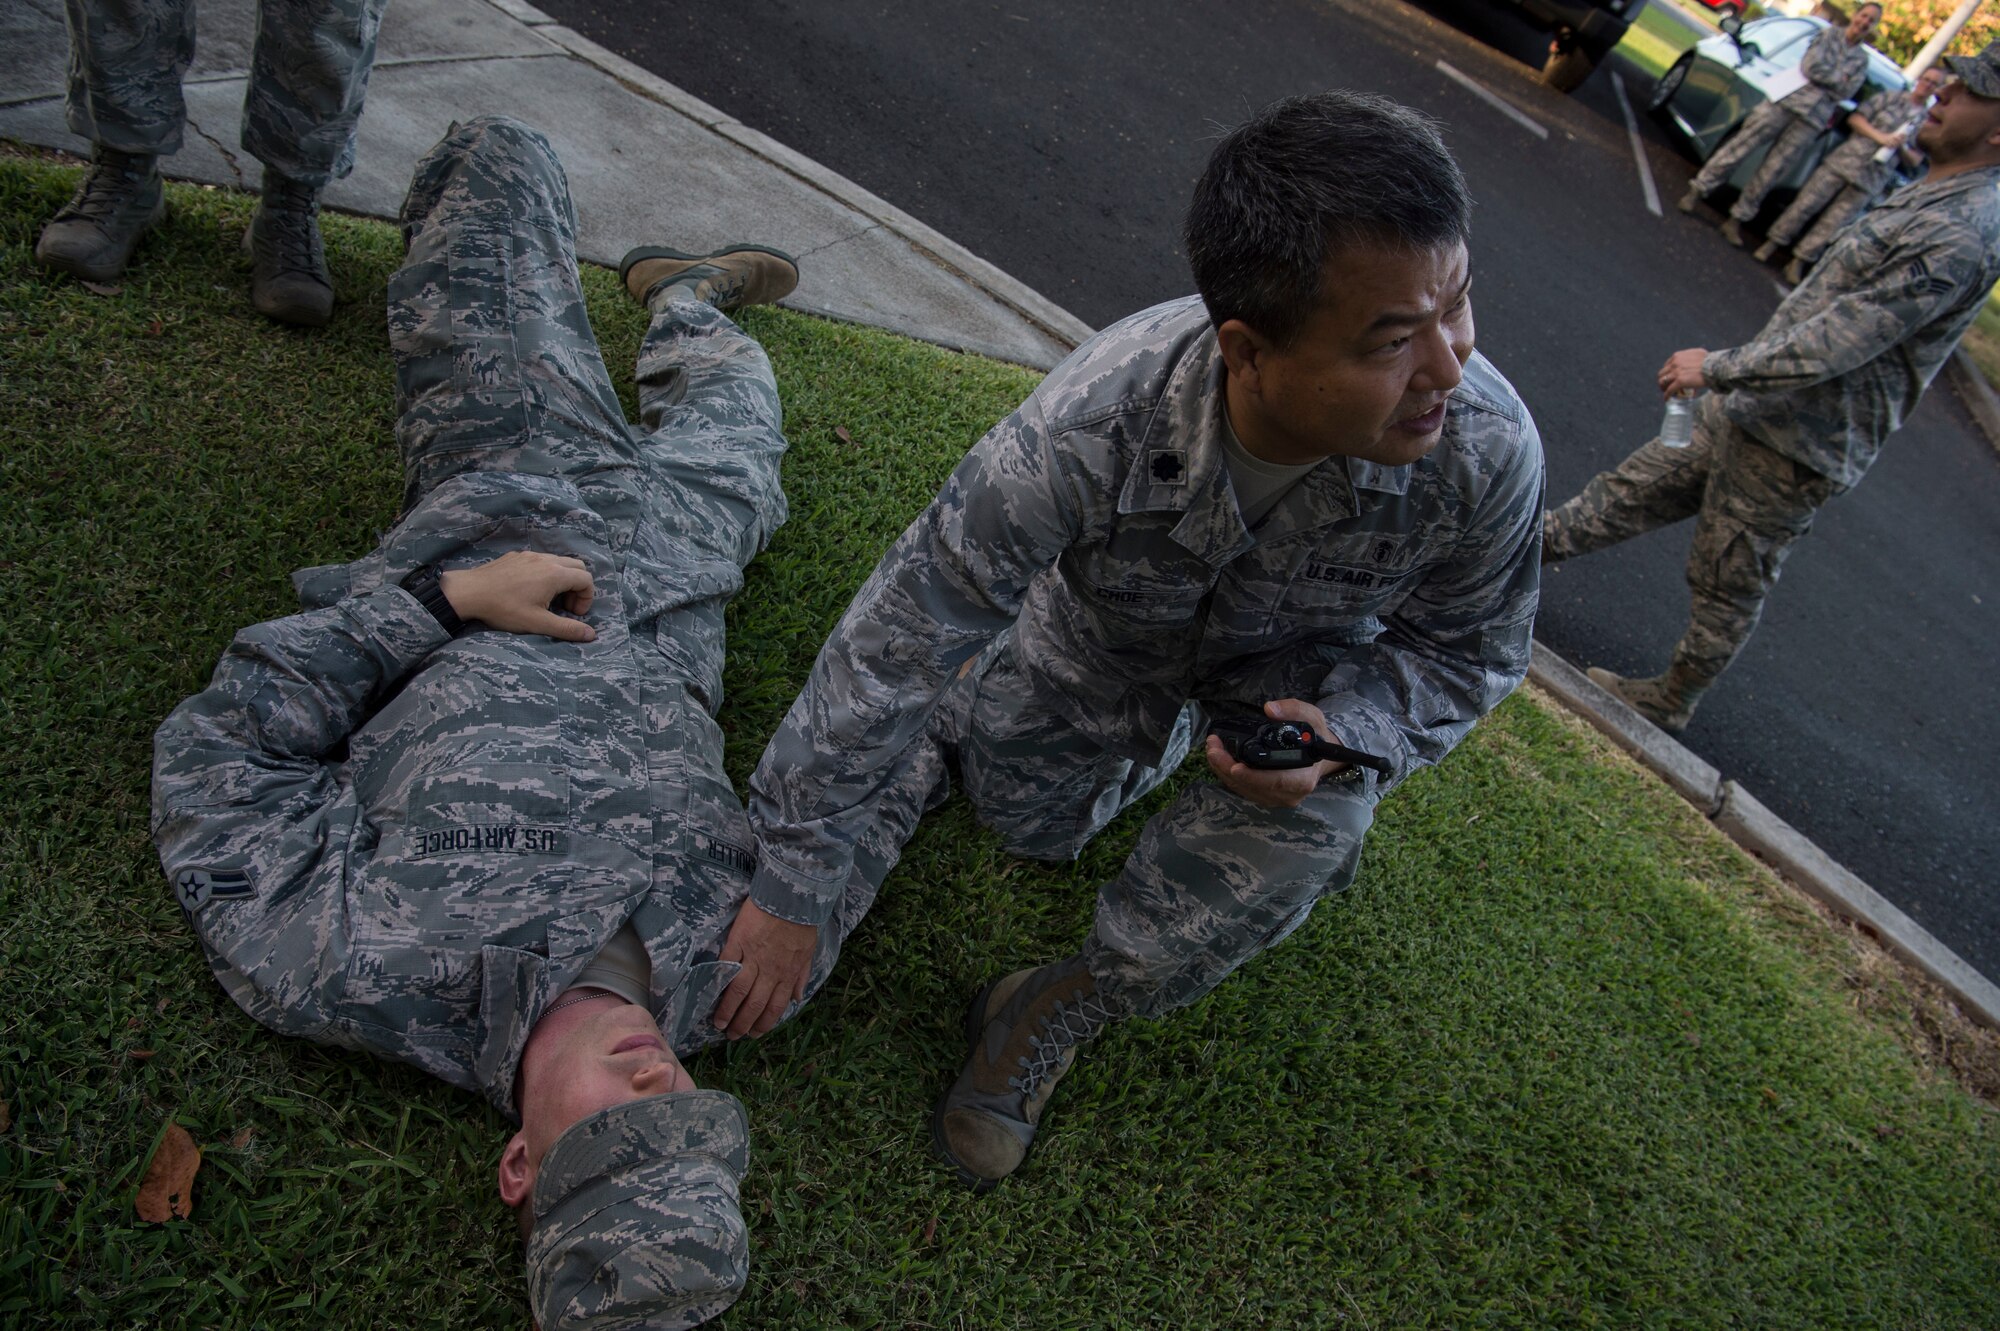 Lt. Col. Haeoh Choe, 15th Wing Medical Group, provides aid to Airman 1st Class Wayne Biemuller during a mass-casualty scenario for Rim of the Pacific exercise at Joint Base Pearl Harbor-Hickam, July 12, 2018. Twenty-five nations, 46 ships, five submarines, about 200 aircraft and 25,000 personnel are participating in RIMPAC from June 27 to Aug. 2 in and around the Hawaiian Islands and Southern California. The world’s largest international maritime exercise, RIMPAC provides a unique training opportunity while fostering and sustaining cooperative relationships among participants critical to ensuring the safety of sea lanes and security of the world’s oceans. RIMPAC 2018 is the 26th exercise in the series that began in 1971. (U.S. Air Force photo by Tech. Sgt. Heather Redman)